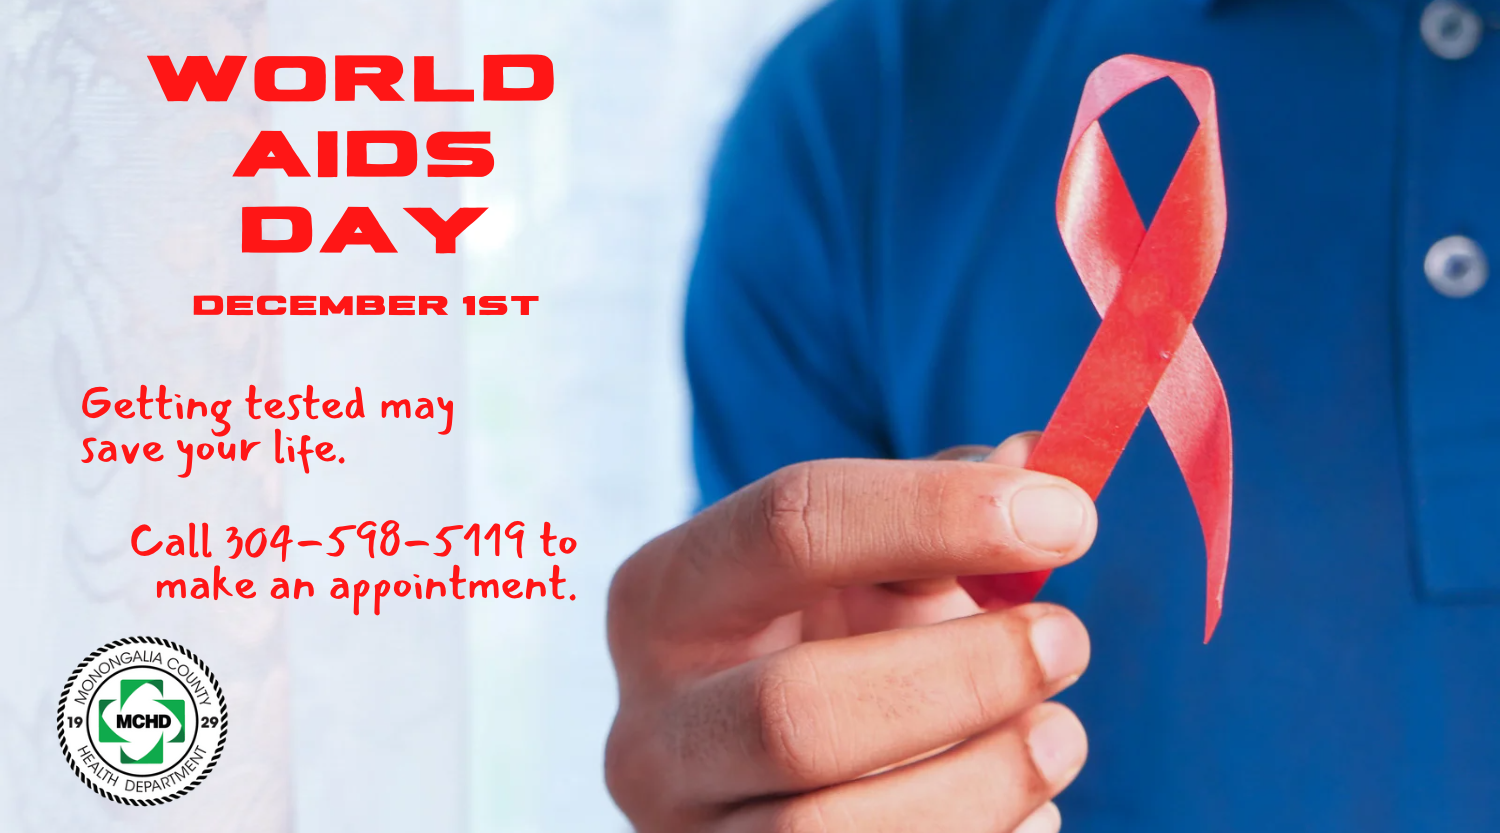 World AIDS Day reminds us that awareness is key